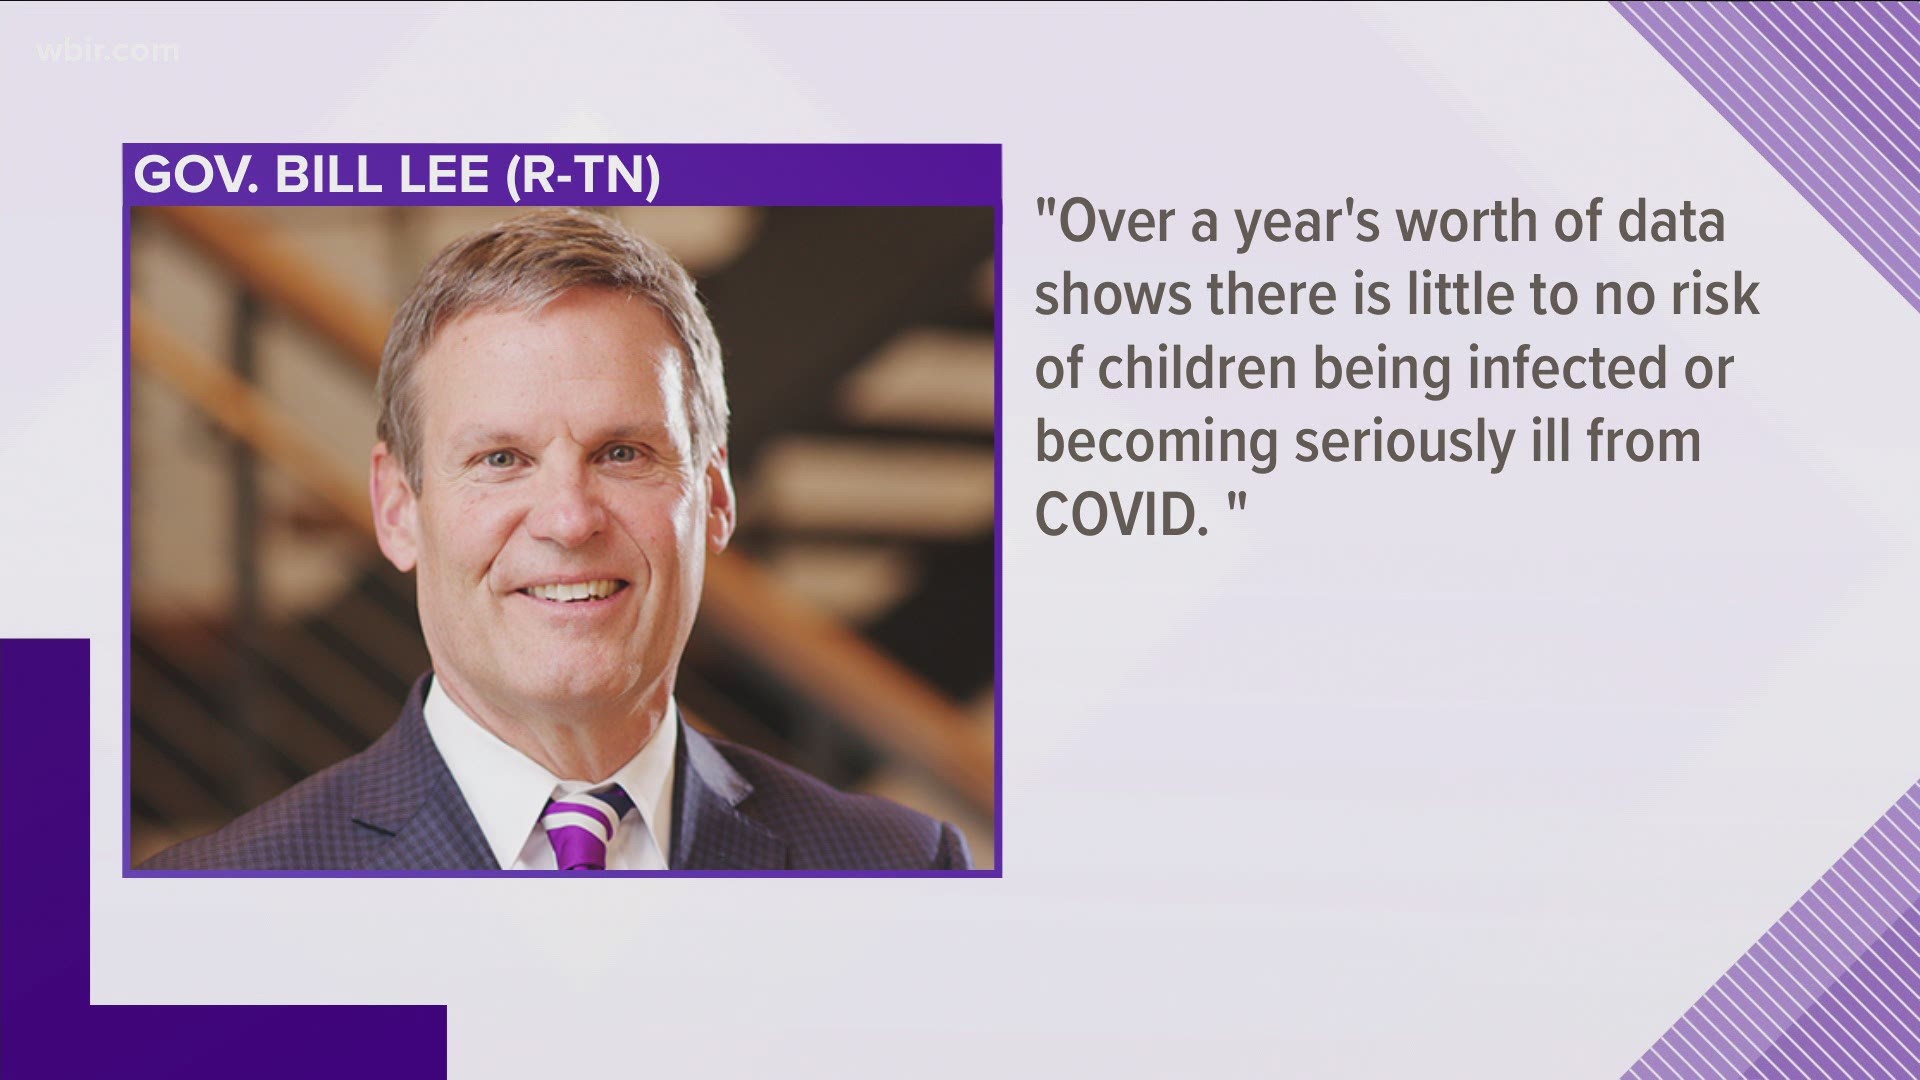 Governor Bill Lee is facing criticism from doctors who say he's spreading misinformation about Covid-19 and children.